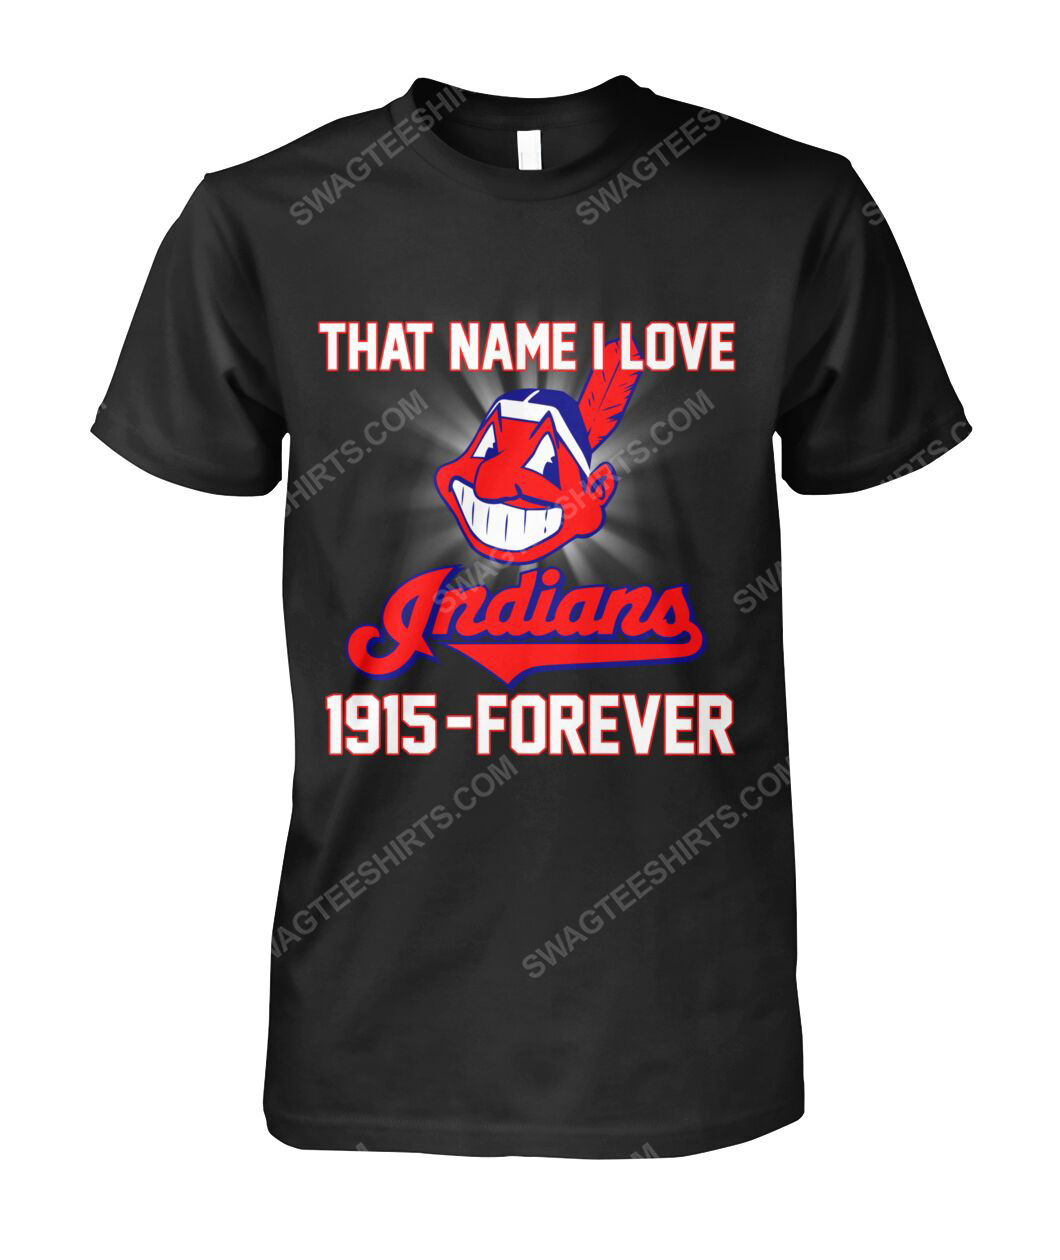 That name i love cleveland indians 1915 forever tshirt 1